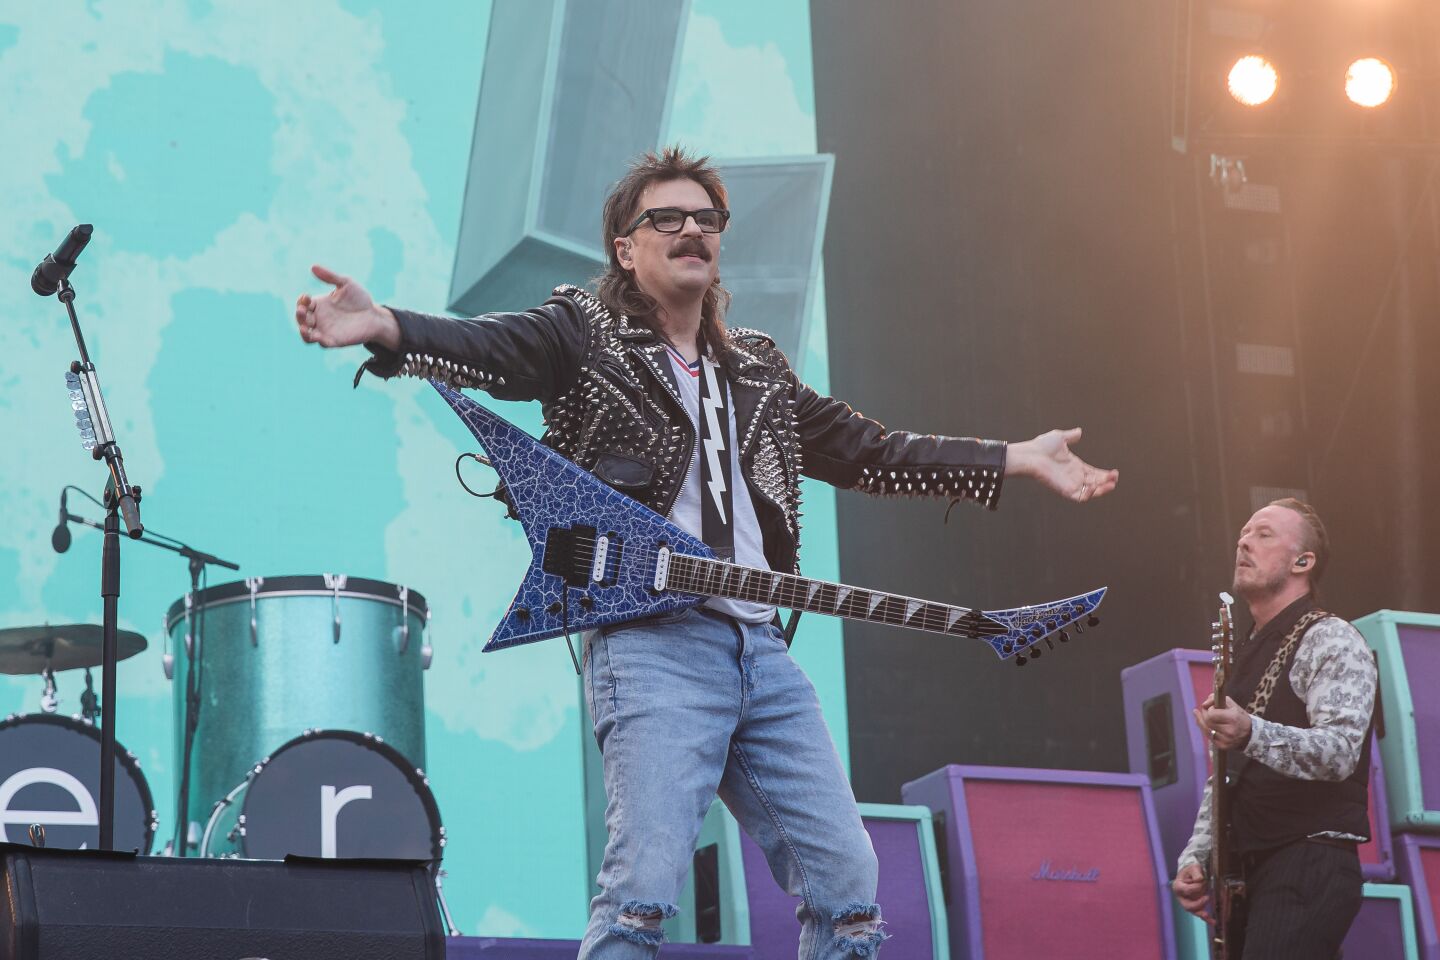 Singer Rivers Cuomo from Weezer at Petco Park during the Hella Mega Tour in downtown San Diego on August 29, 2021.